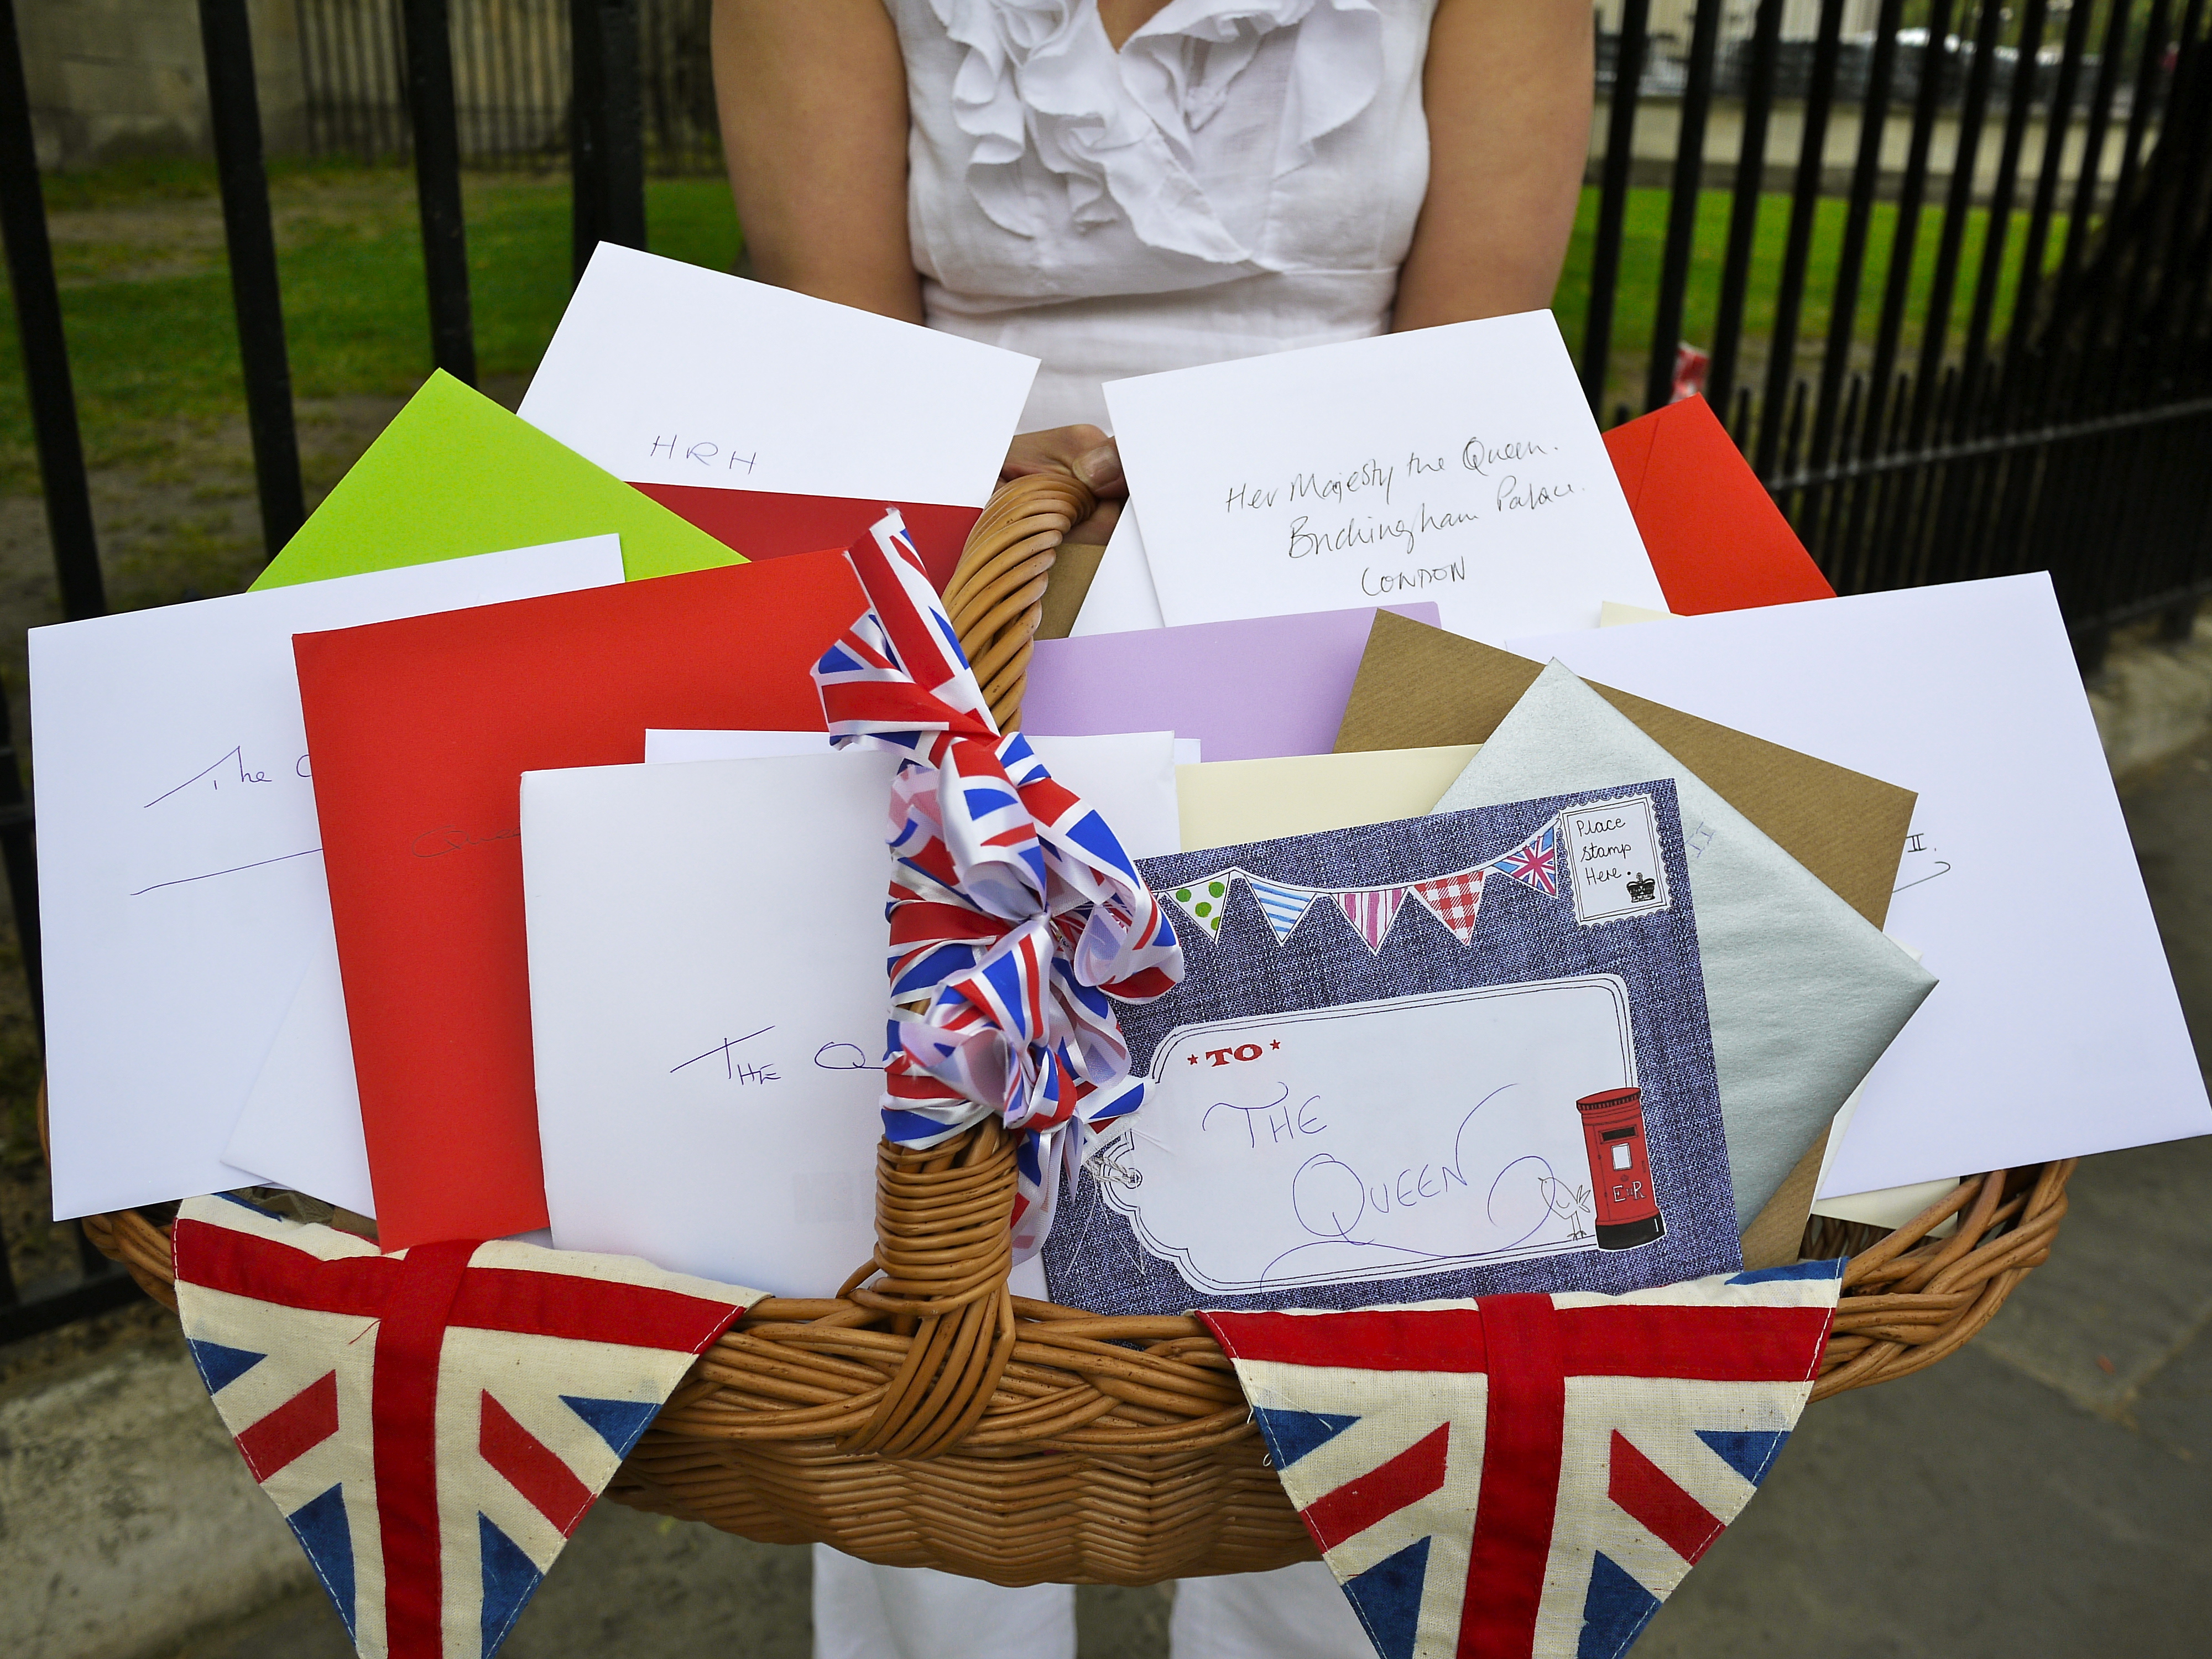 Above: Cards for the Queen – the GCA is to hand deliver a collection of cards from the industry